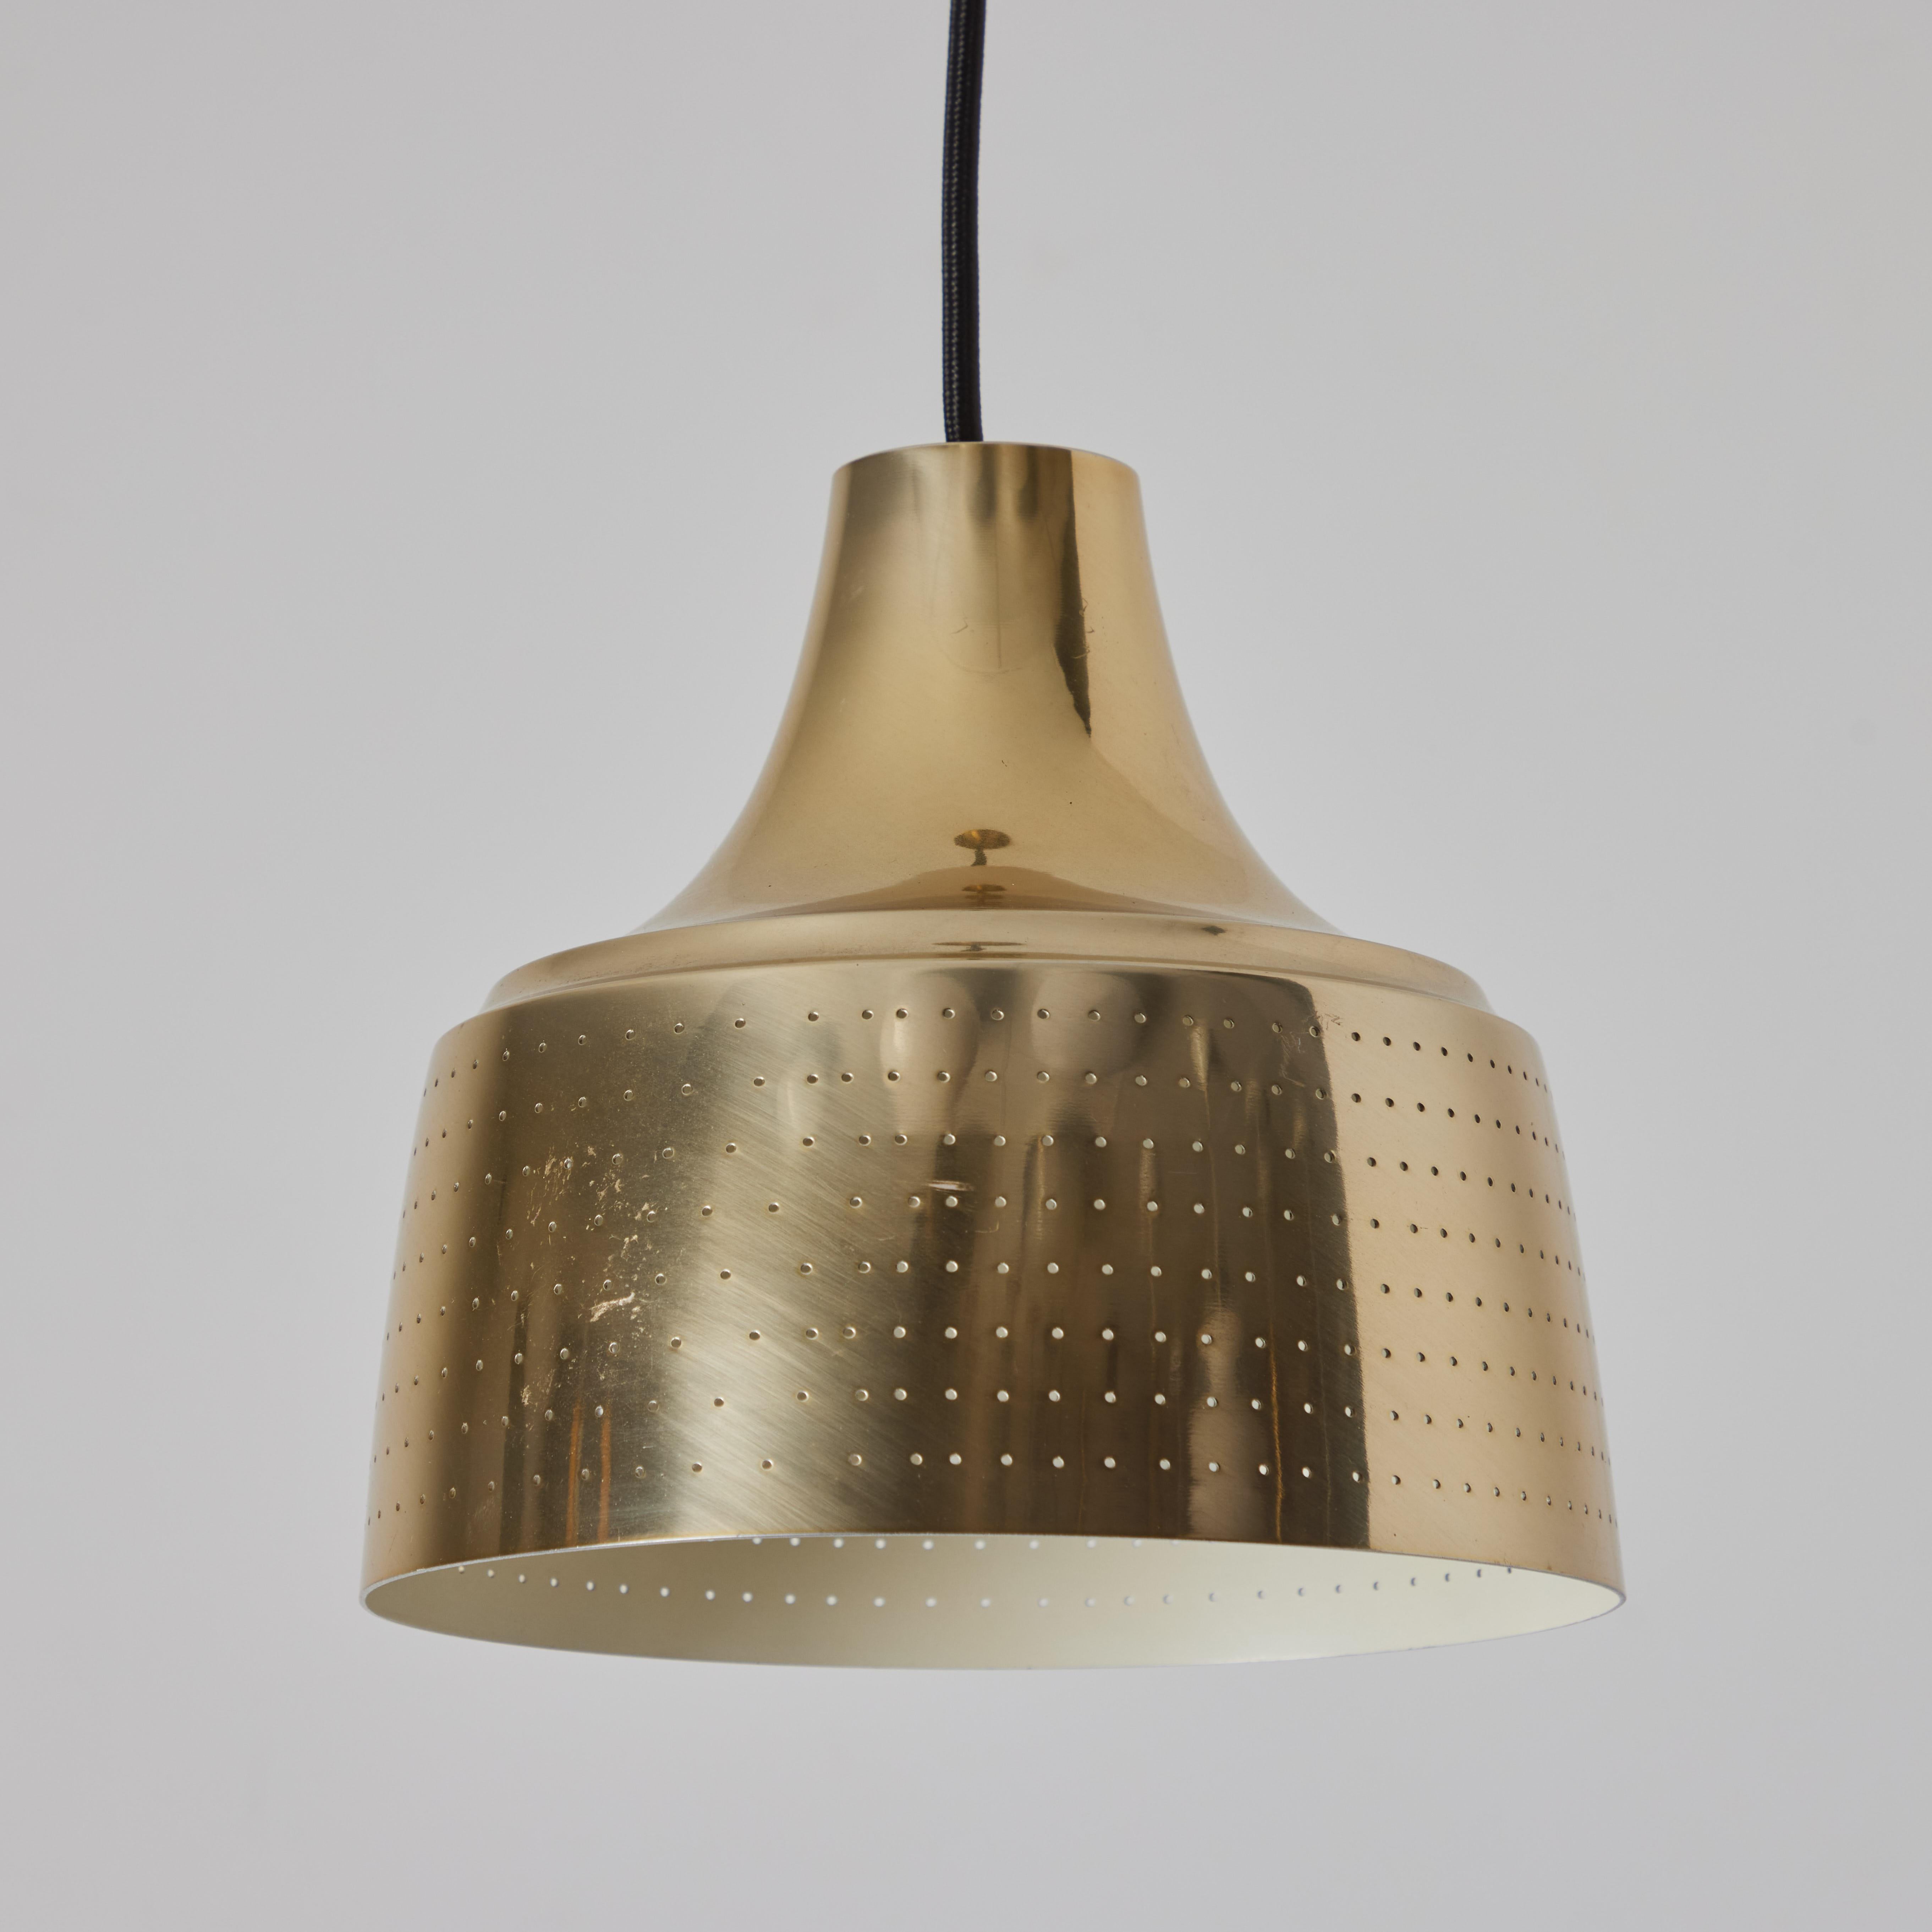 Mid-20th Century 1950s Finnish Perforated Brass Pendant In The Manner of Paavo Tynell For Sale